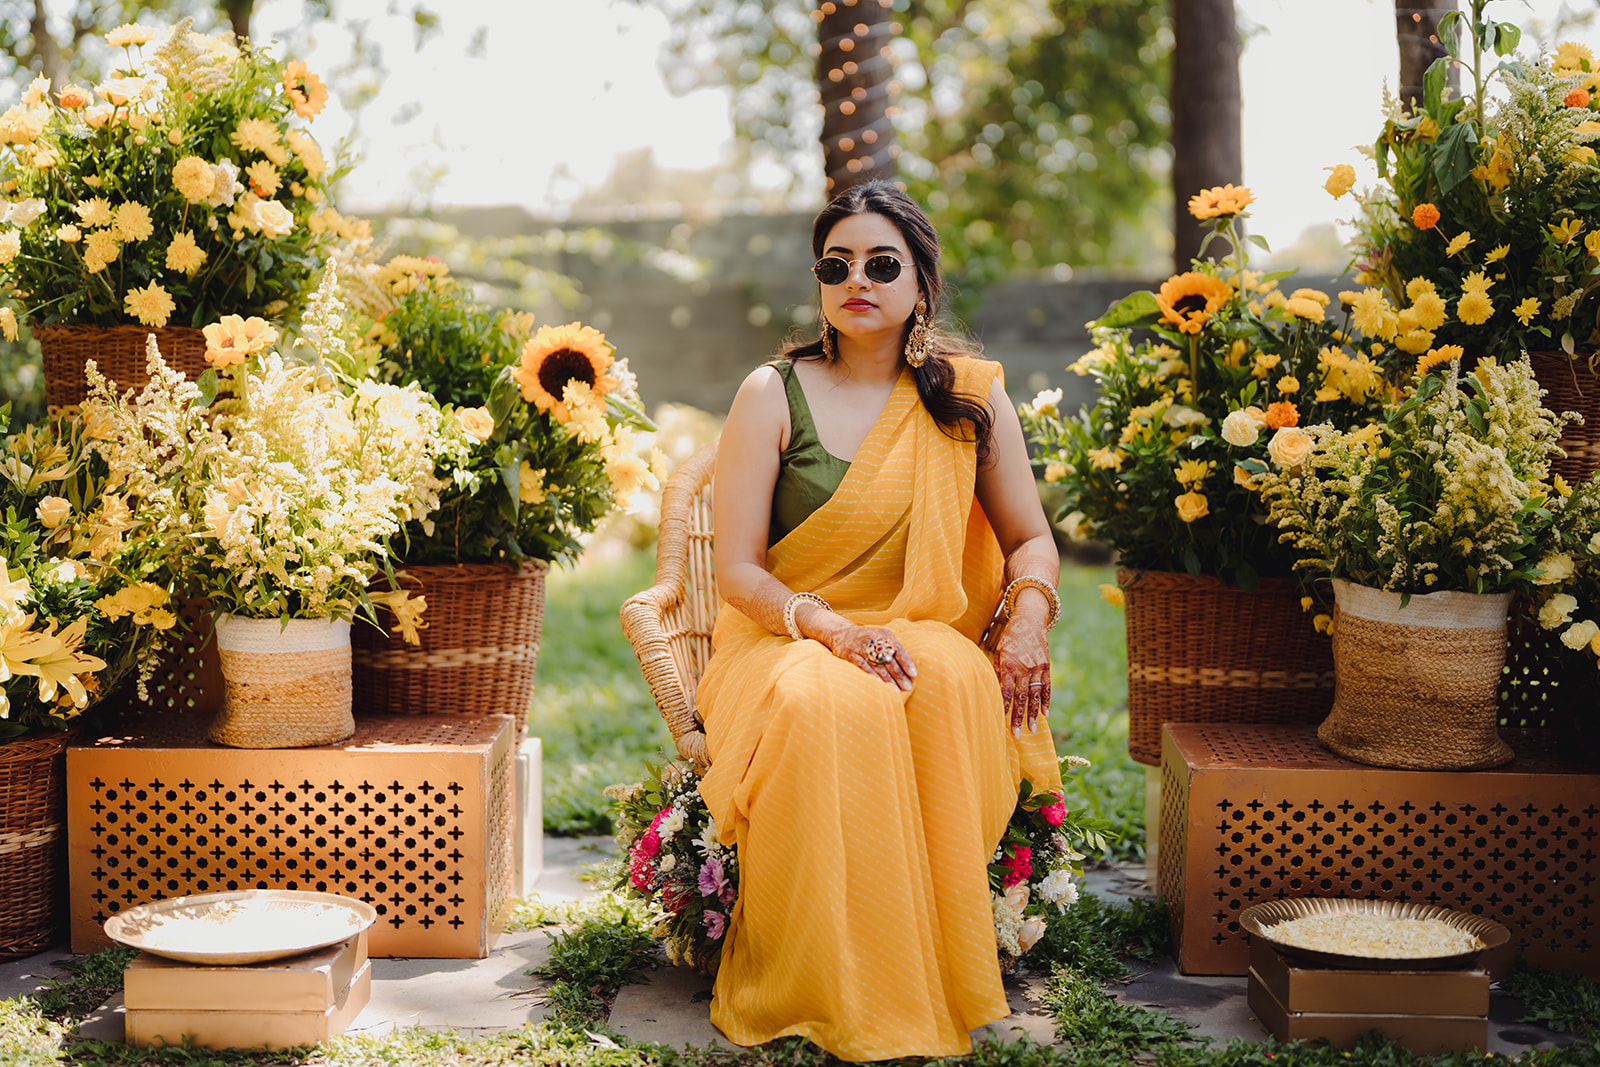 Capturing the joy: Bride all set for her haldi ceremony in traditional clothing.